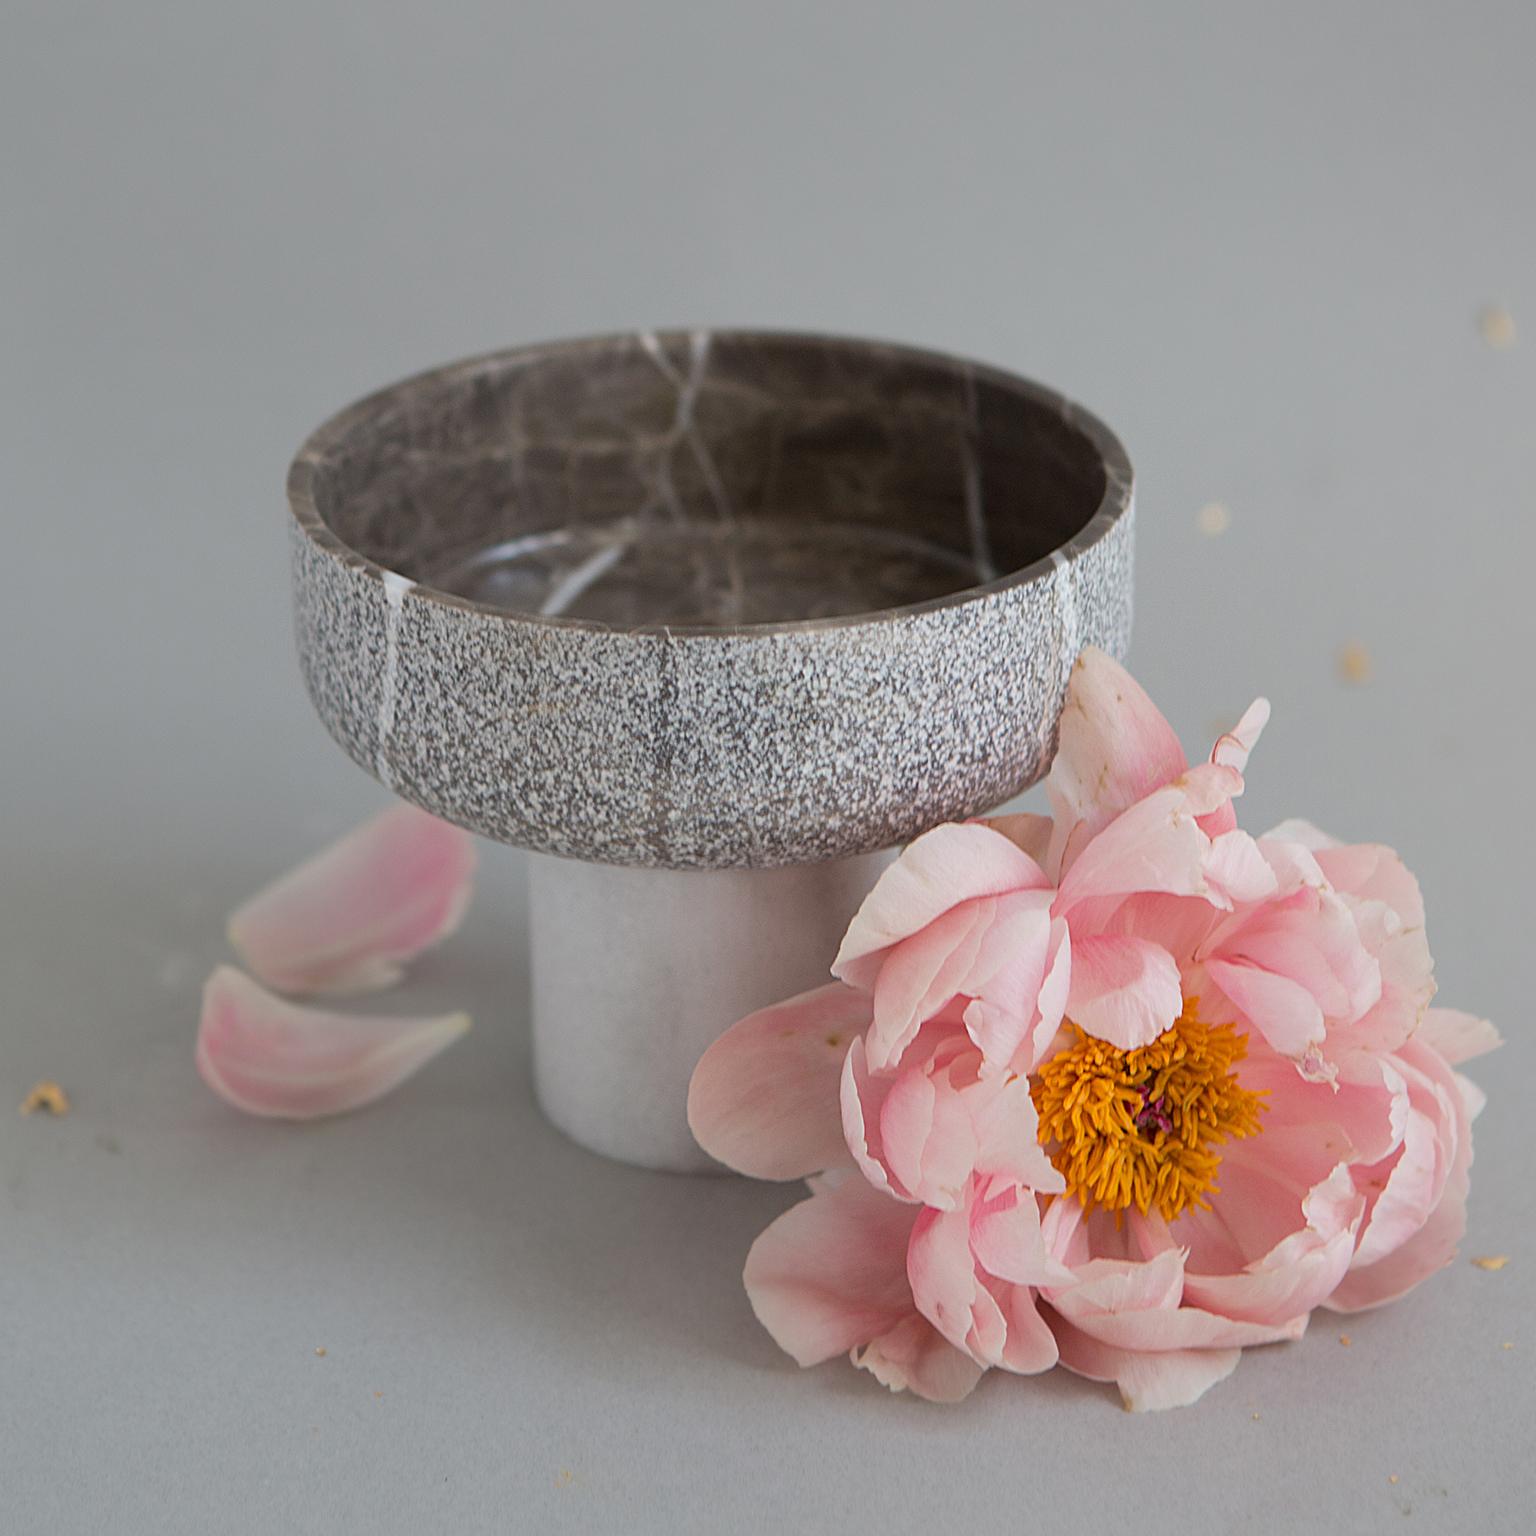 This contemporary footed bowl is made from grey marble, and its base is made from dolomite. Both materials are sourced from a family-owned quarry in southern Turkey. The simplicity of form, pureness of the natural material and beauty of handcraft